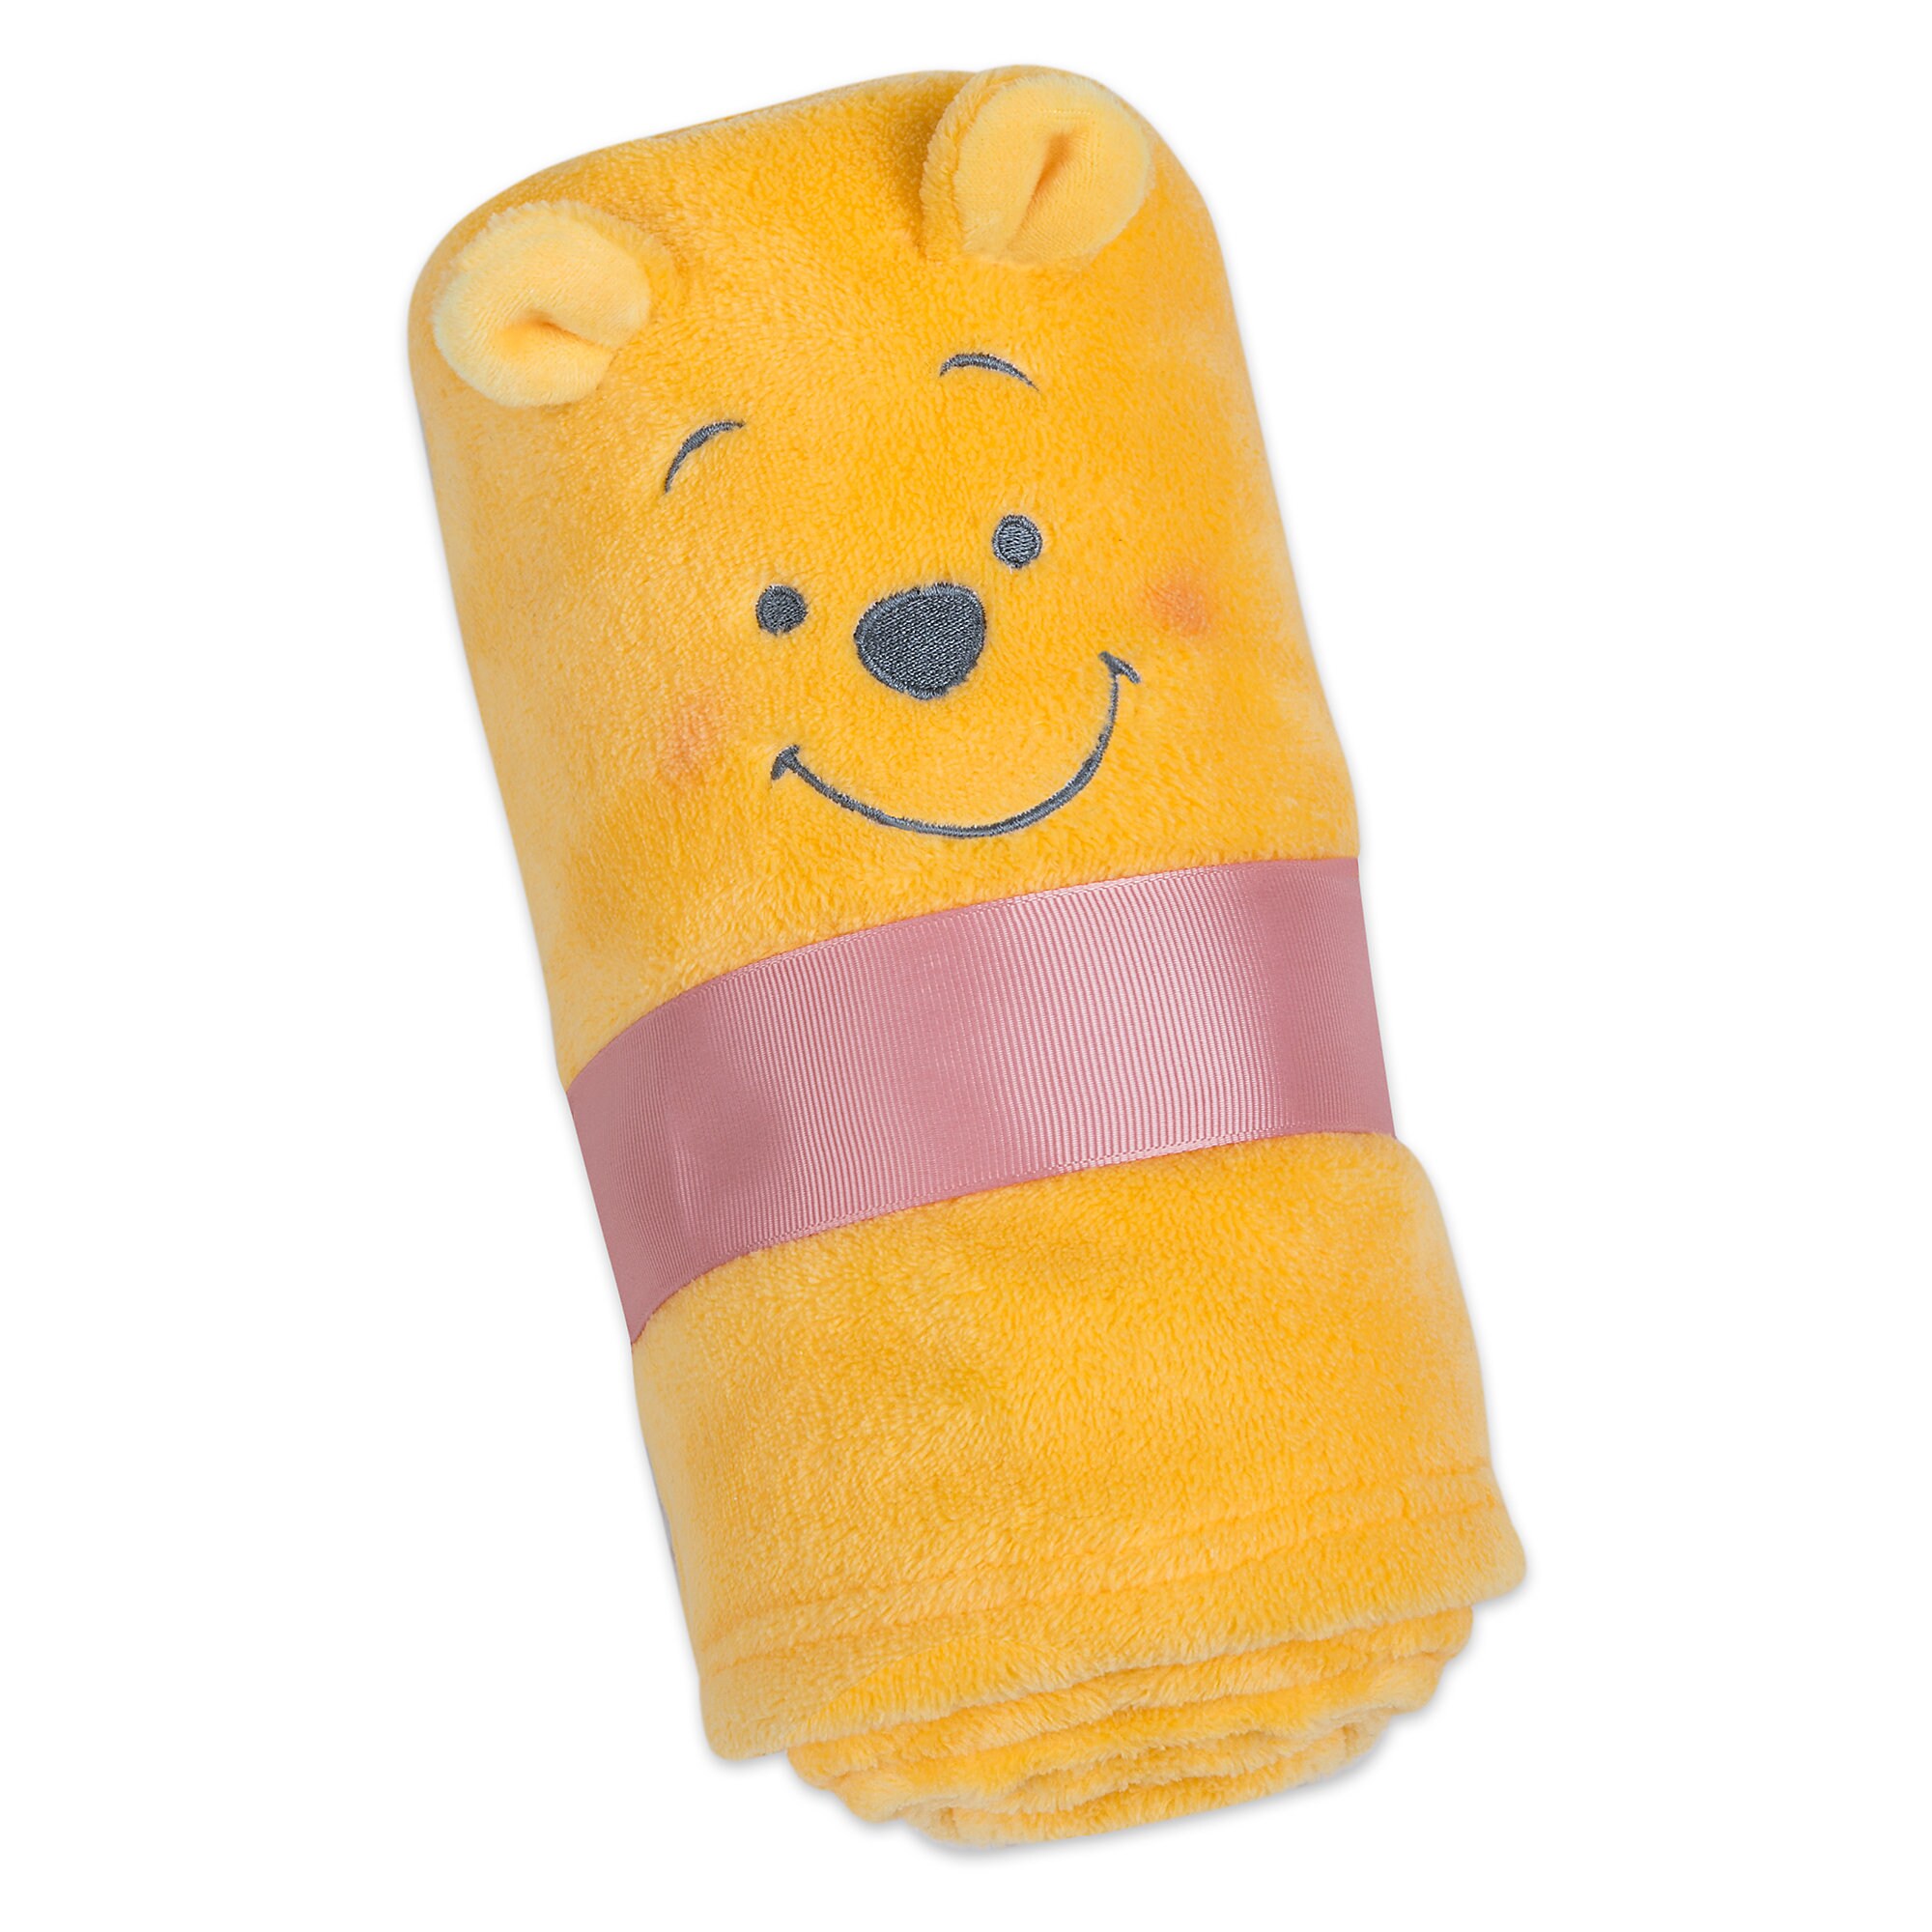 Winnie the Pooh Blanket for Baby - Personalizable